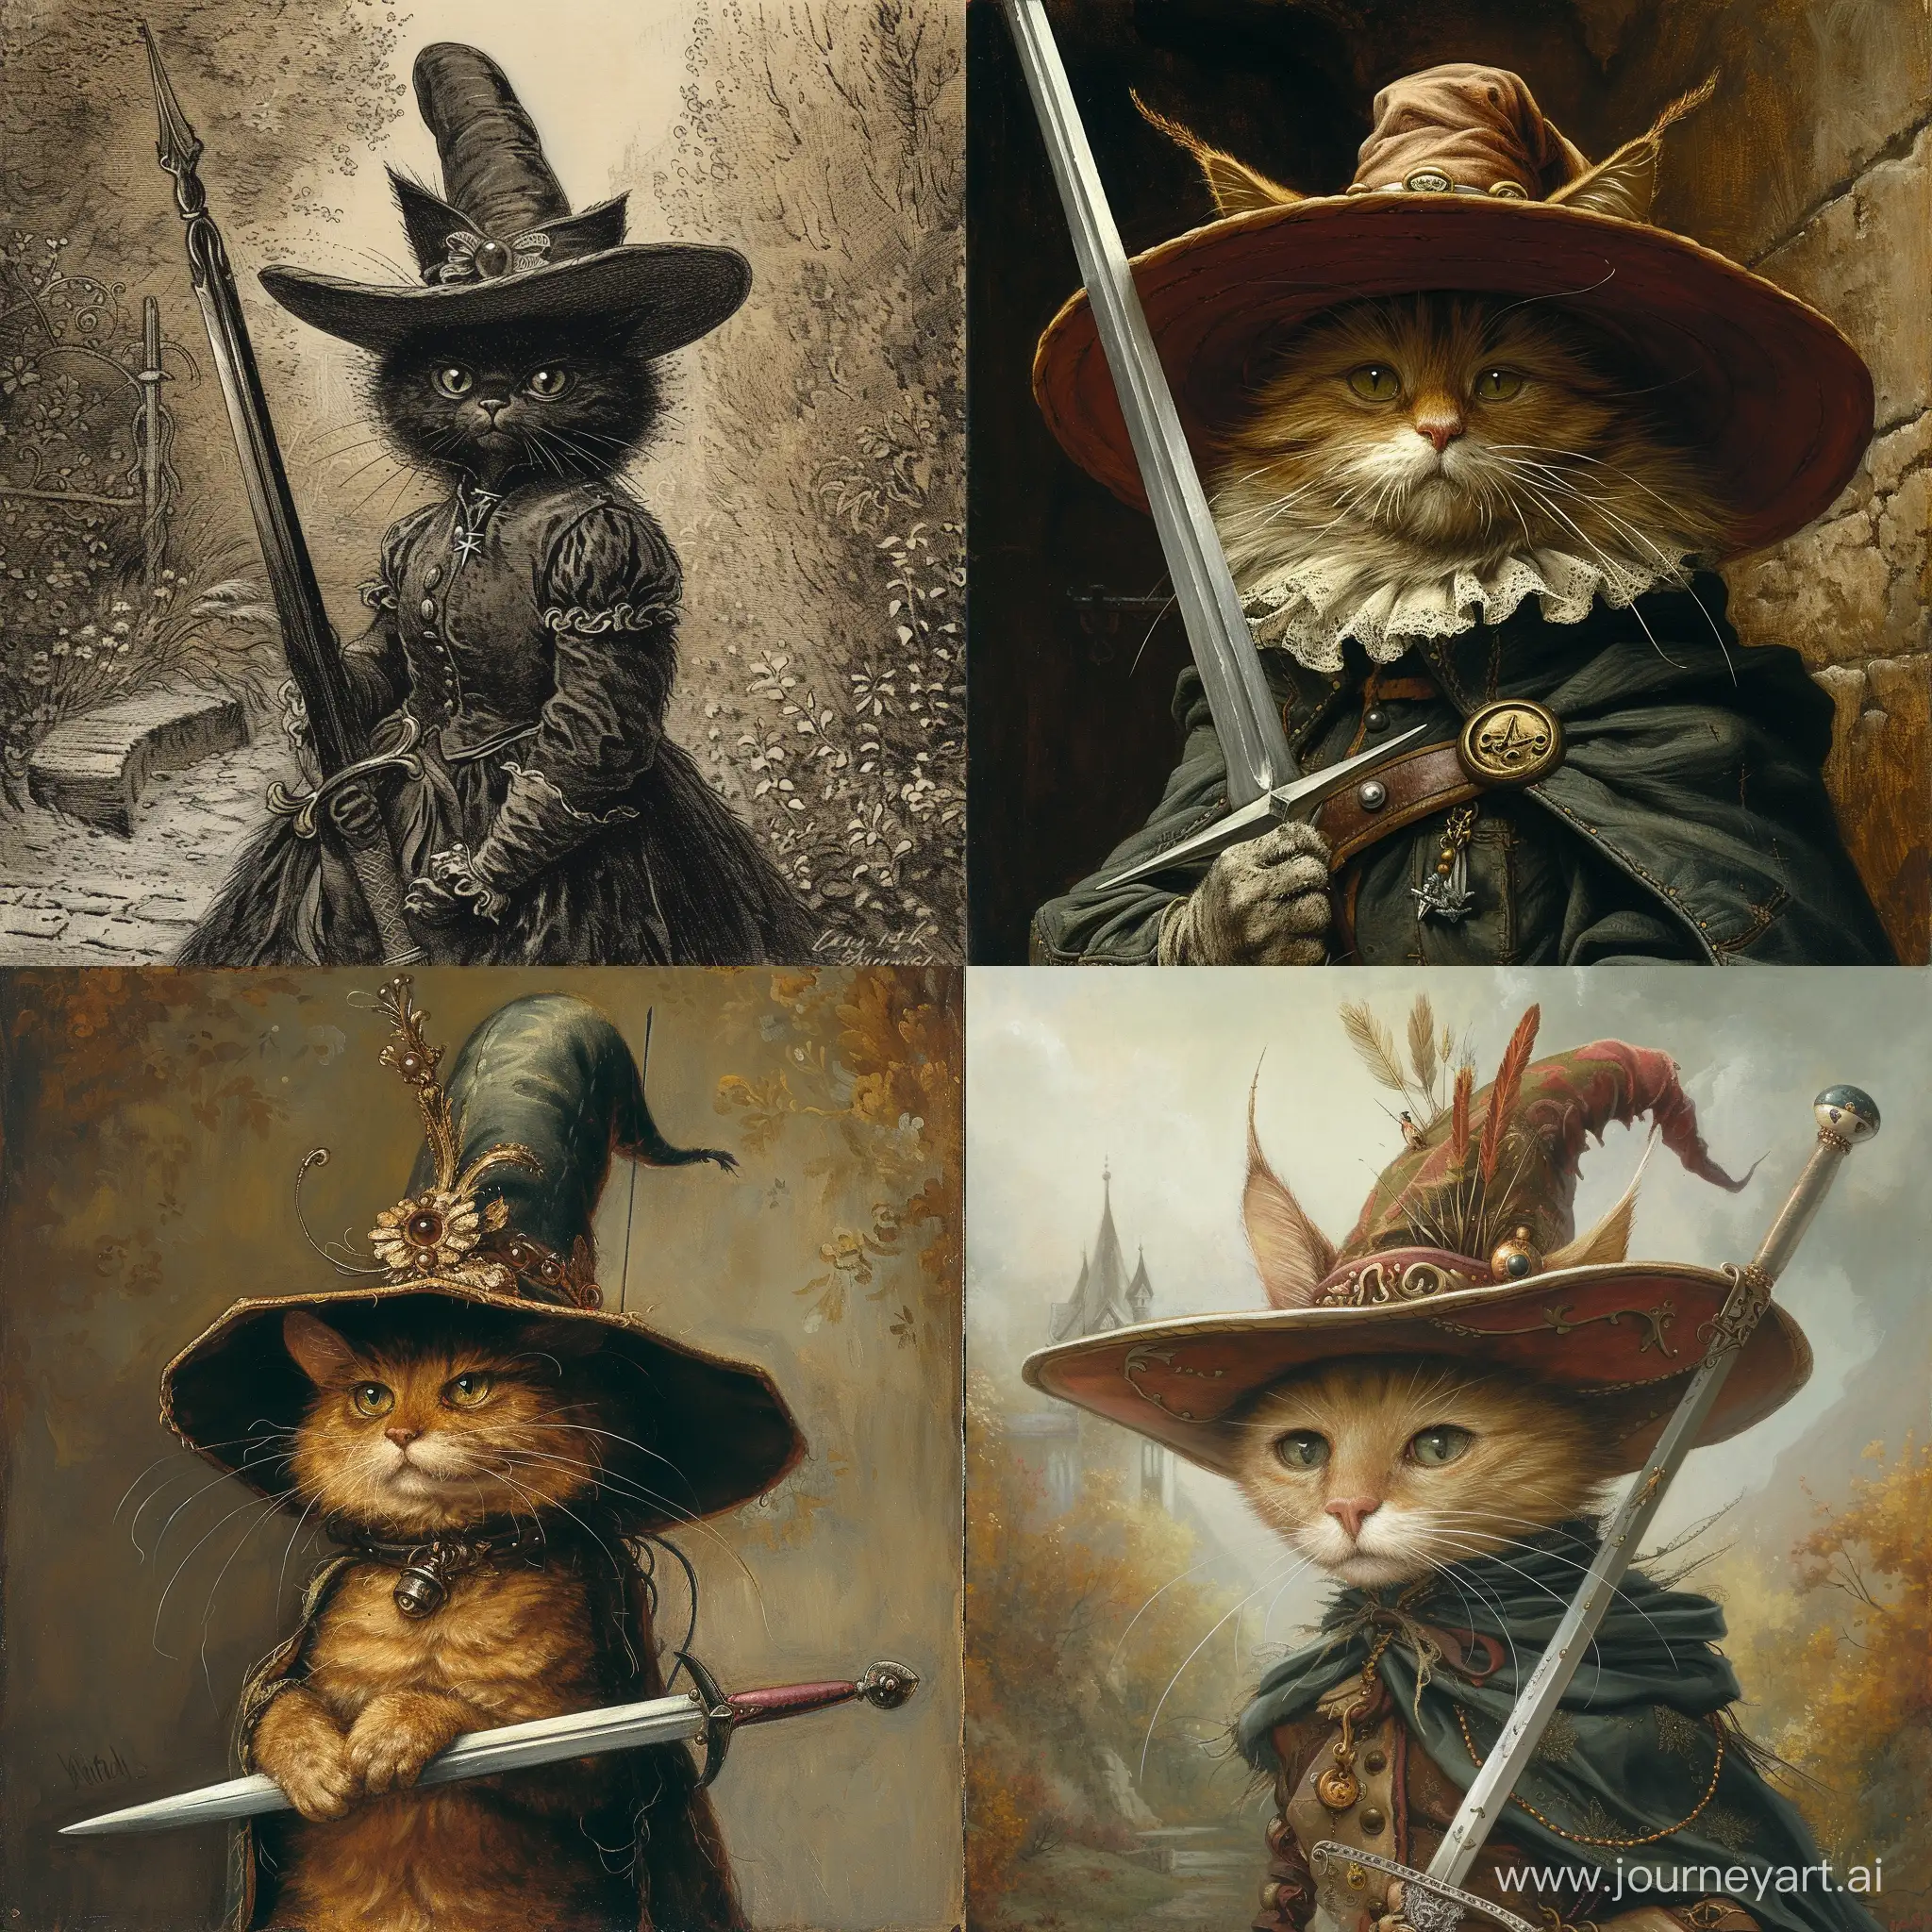 Puss in boots from a fairy tale by Charles Perot, in a hat with a sword